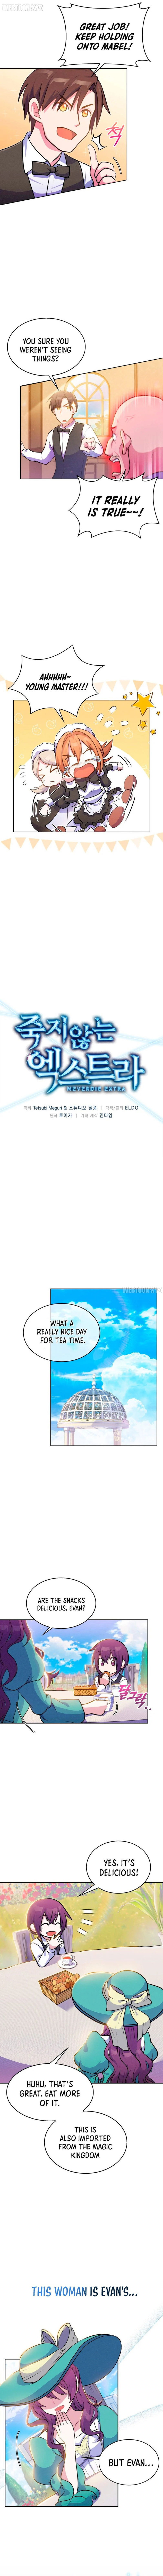 never-die-extra-chap-6-4